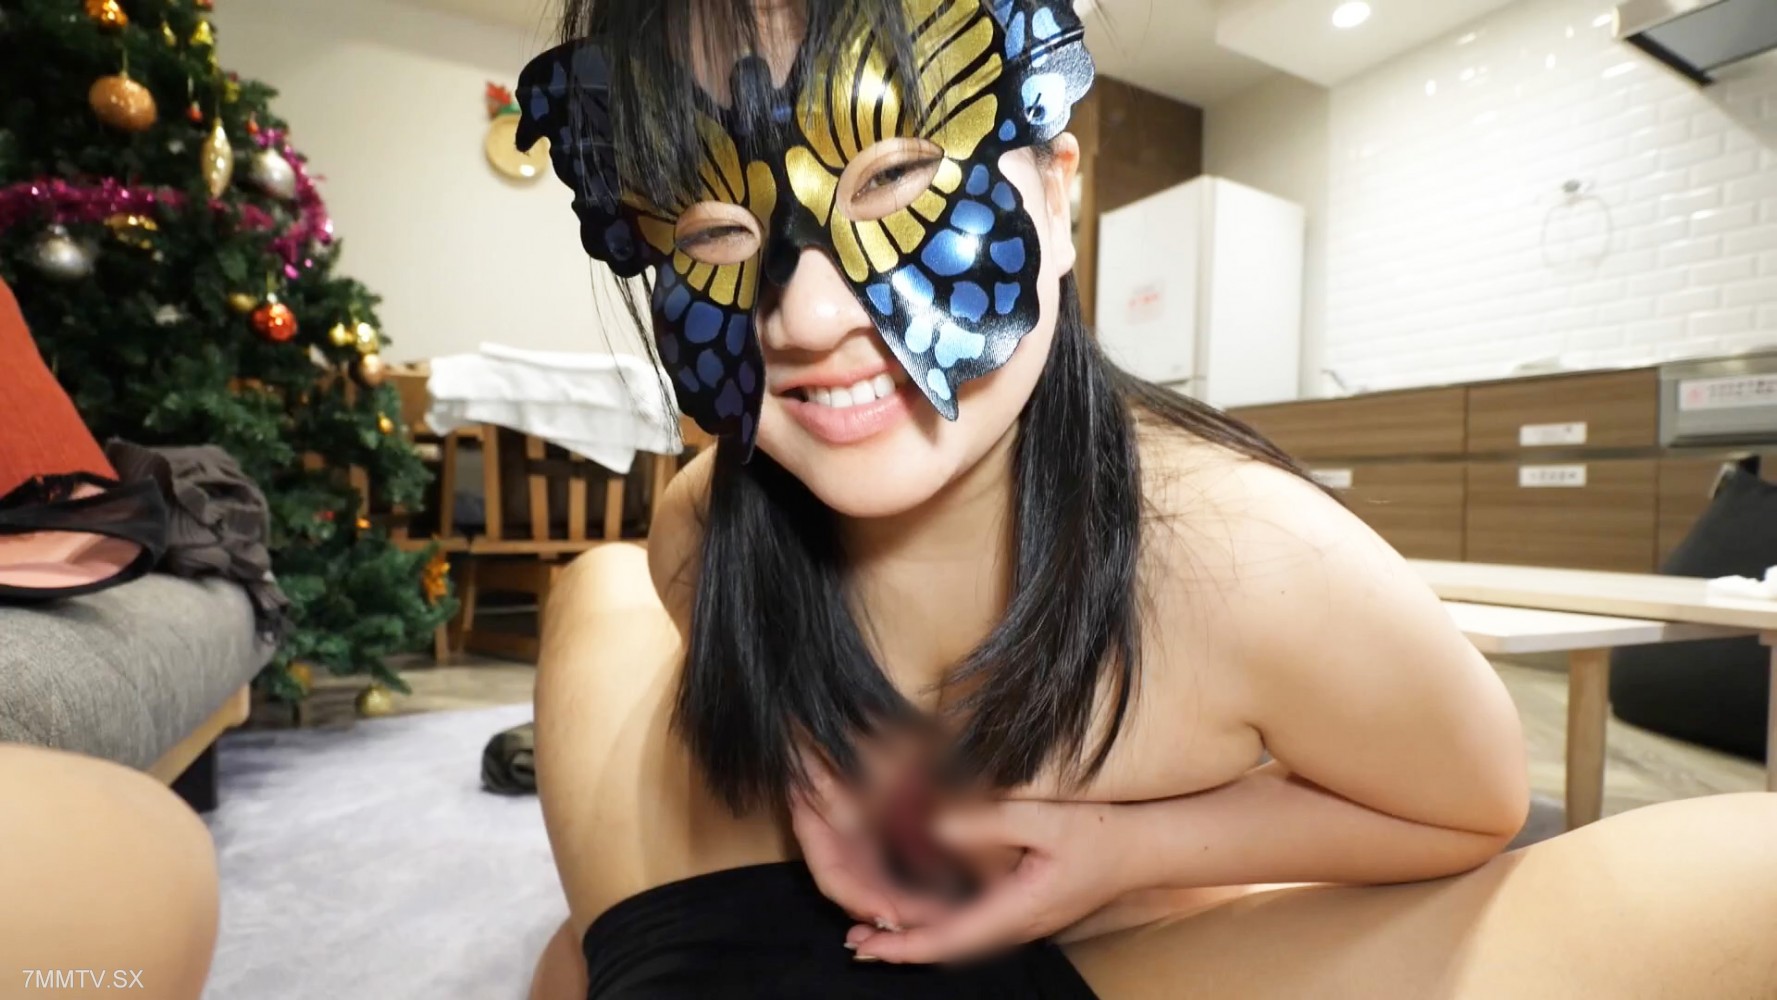 FC2-PPV-3202806 First-time low-phrase, large-scale experience. One happy hand, a public transforming face mask that responds to the appearance of breasts. Possible continuous humiliation and defeat...